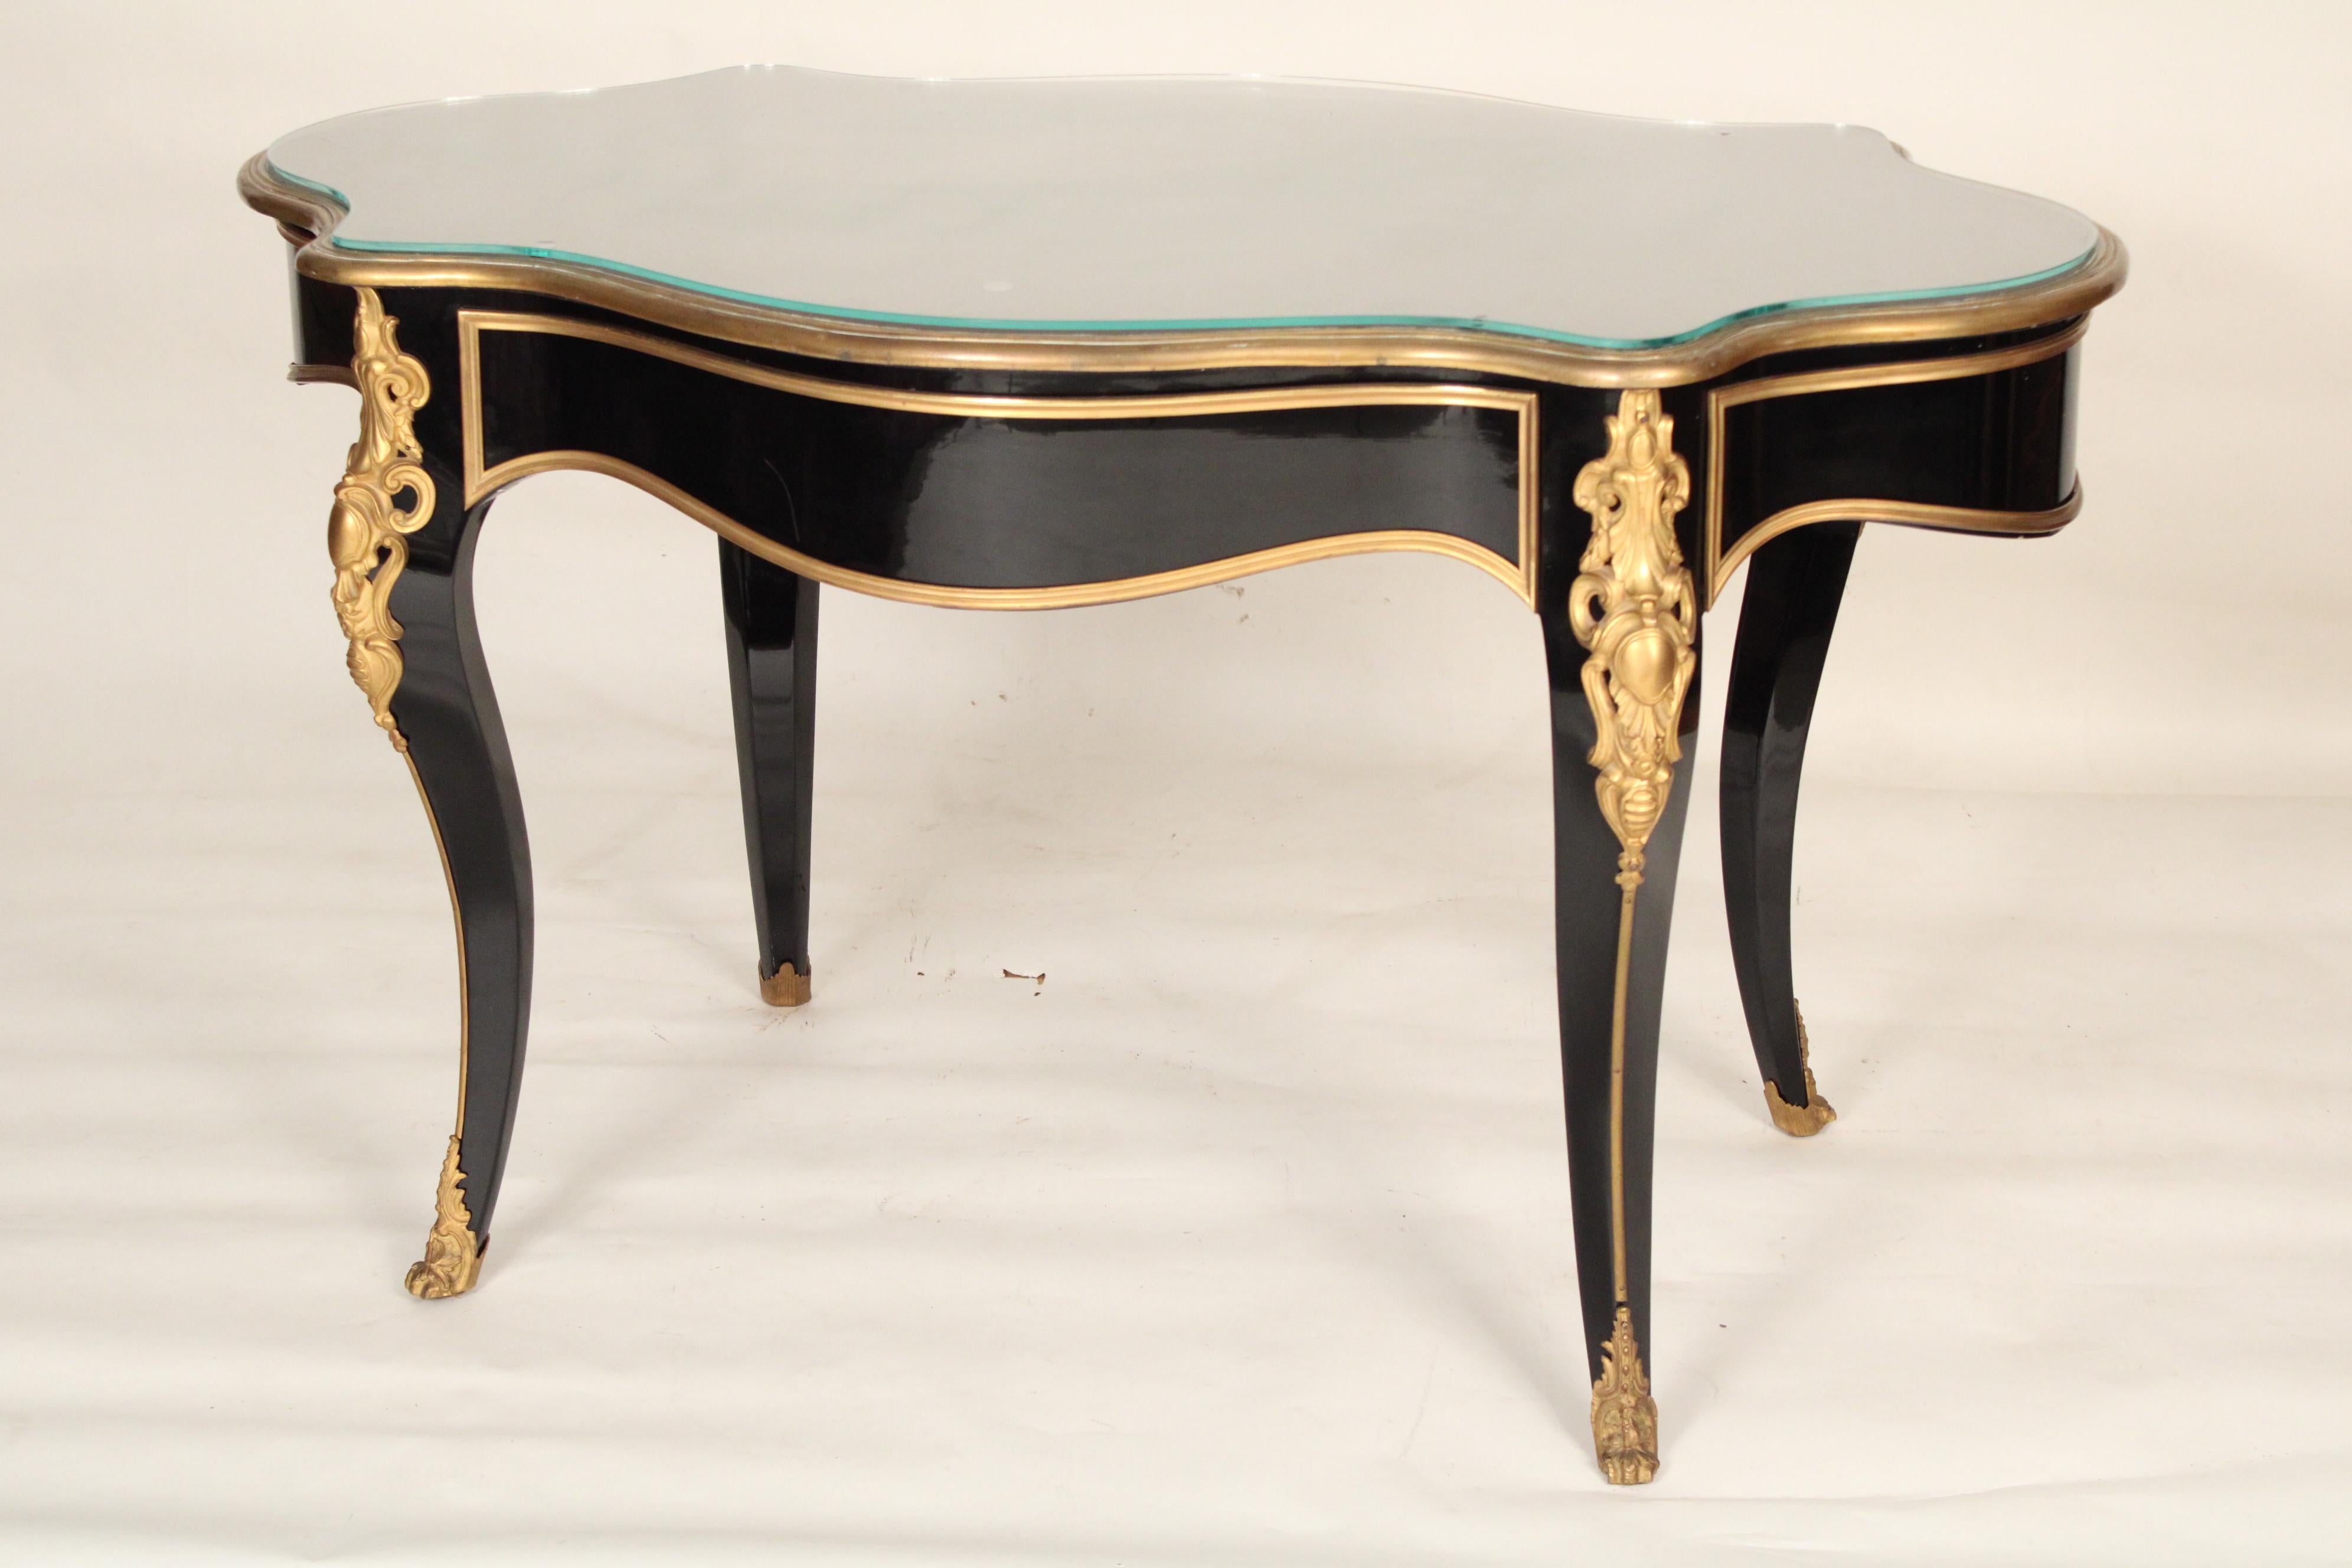 European Napoleon III Black Lacquer and Gilt Bronze Mounted Writing Table / Center Table